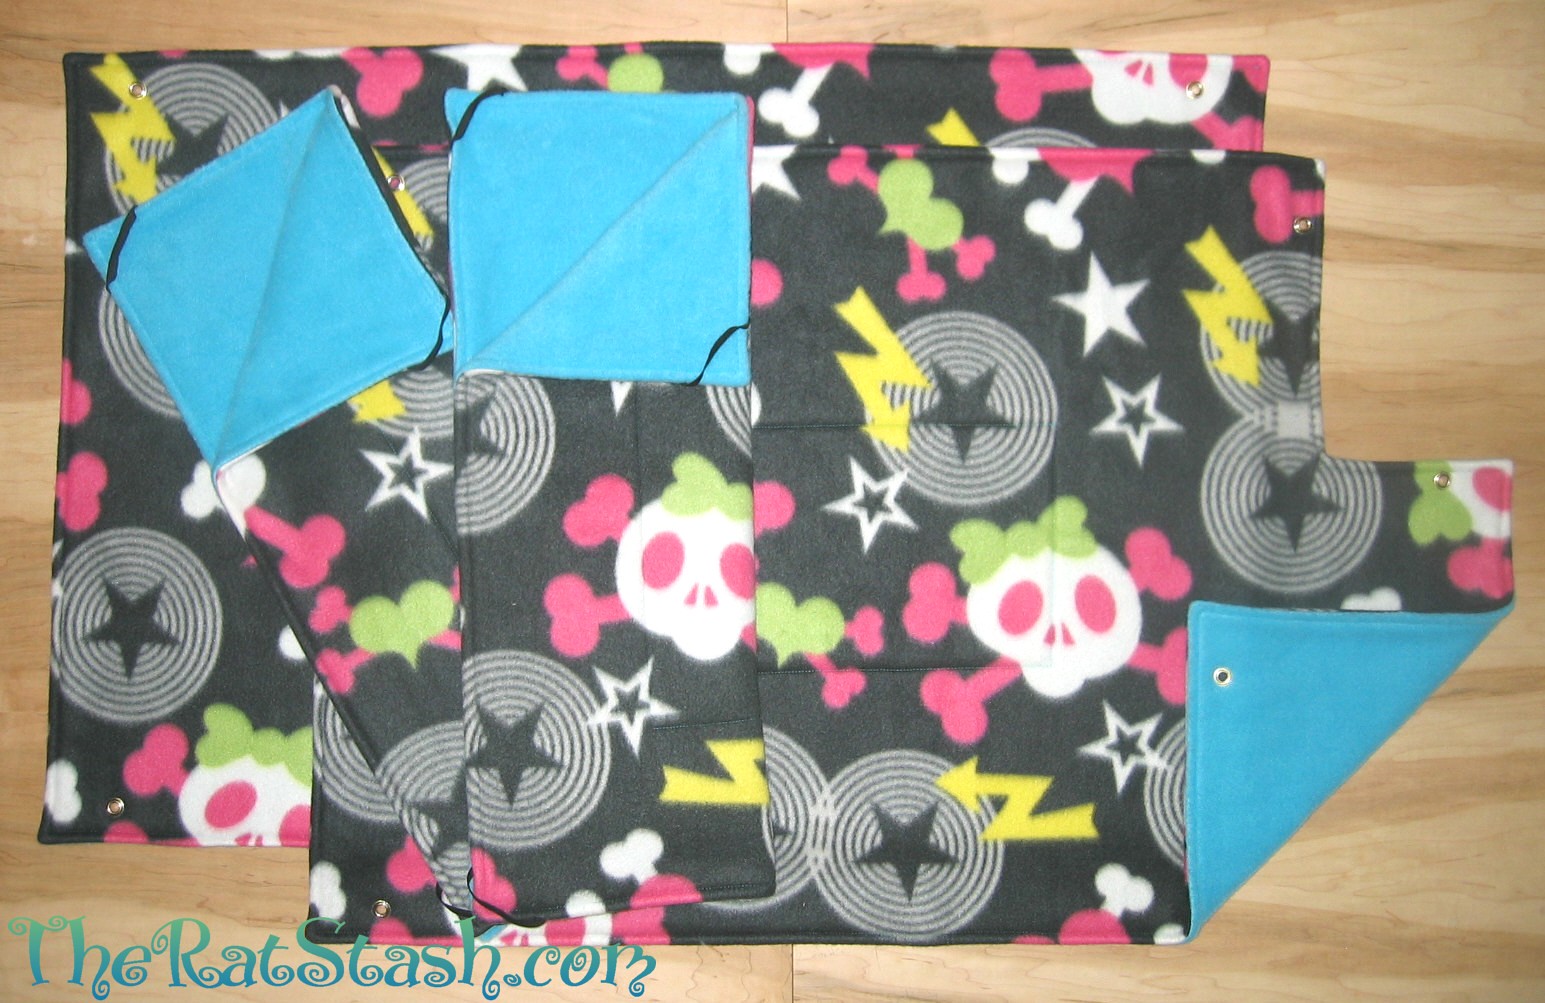 For Sheree: Double FN/CN Liners